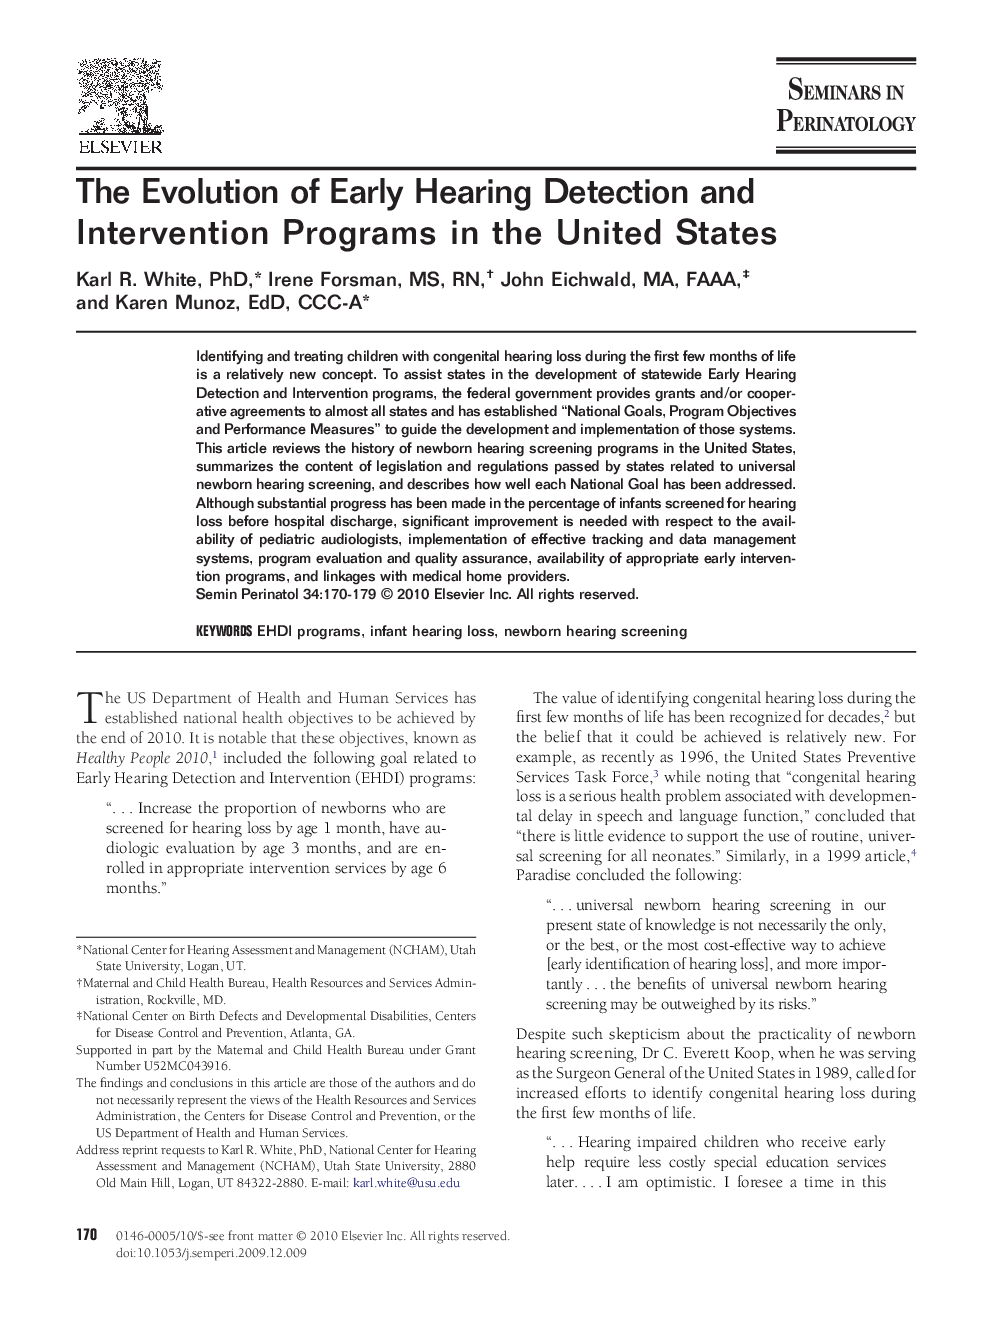 The Evolution of Early Hearing Detection and Intervention Programs in the United States 